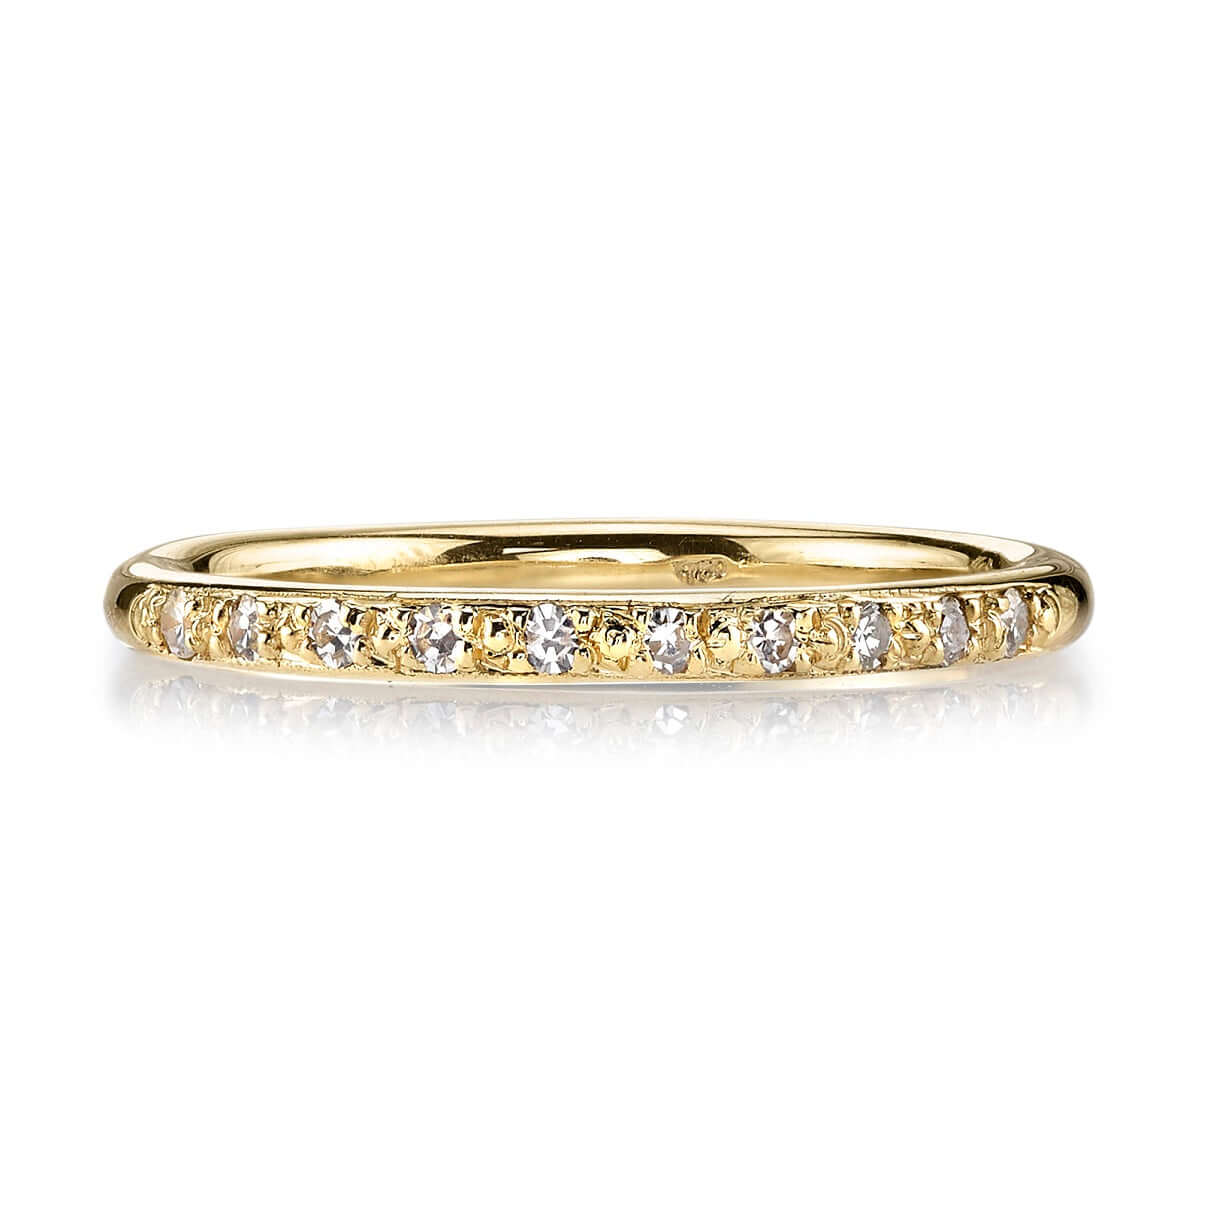 SINGLE STONE JAMIE BAND | Approximately 0.10ctw old European cut diamonds pave set in a handcrafted prong set half eternity band. Approximate band width 2mm. Please inquire for additional customization.